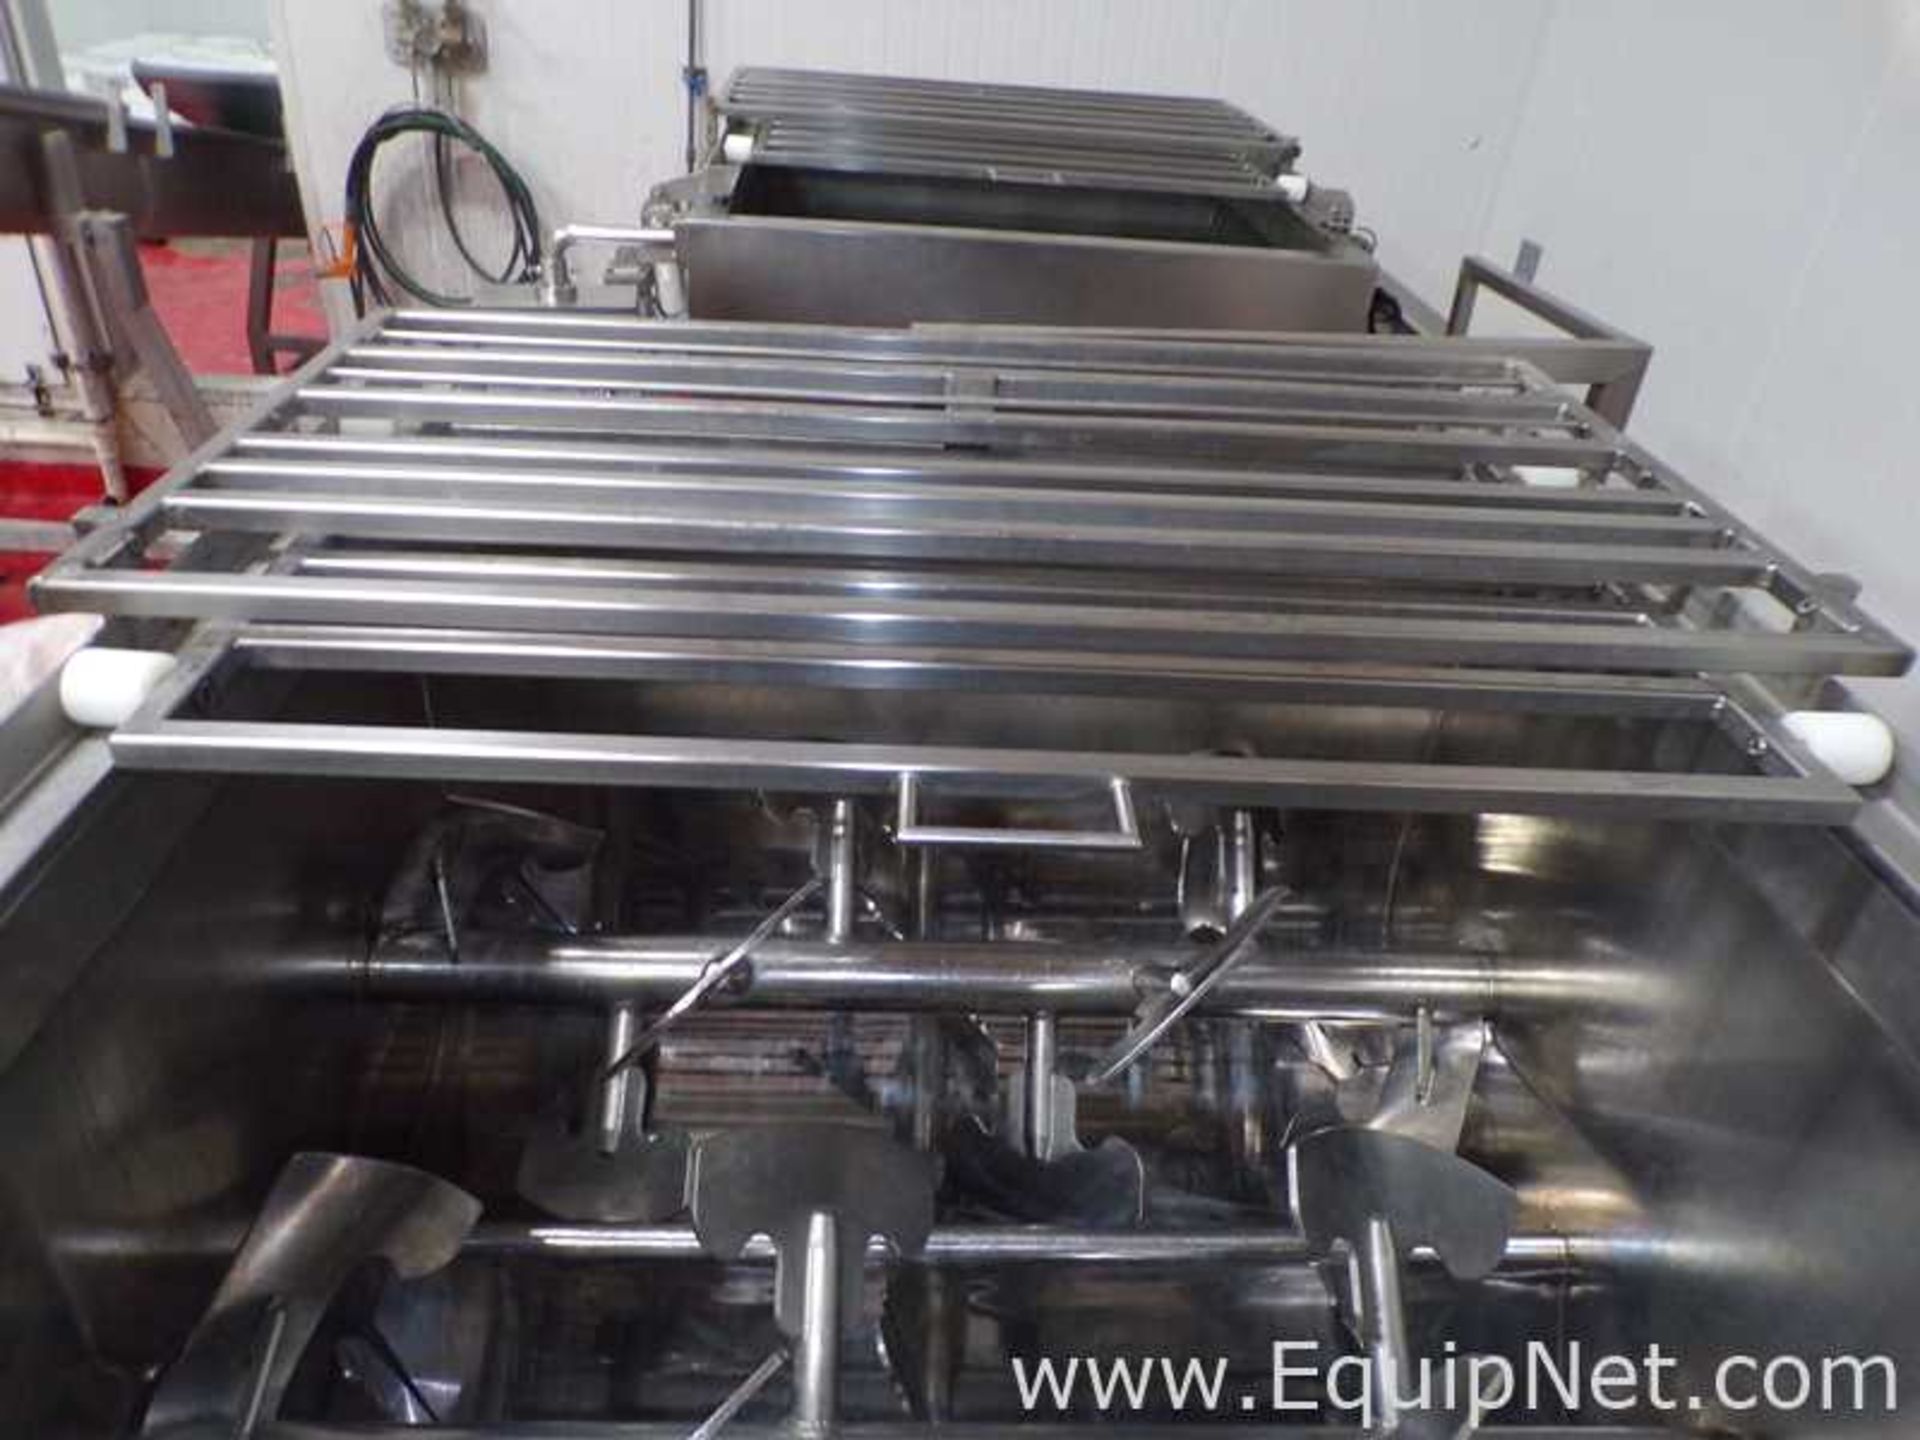 AFG Blend Systems JB1200 Stainless Steel 1200L Double Shaft Elliptical Spiral Blade Mixer - Image 3 of 8